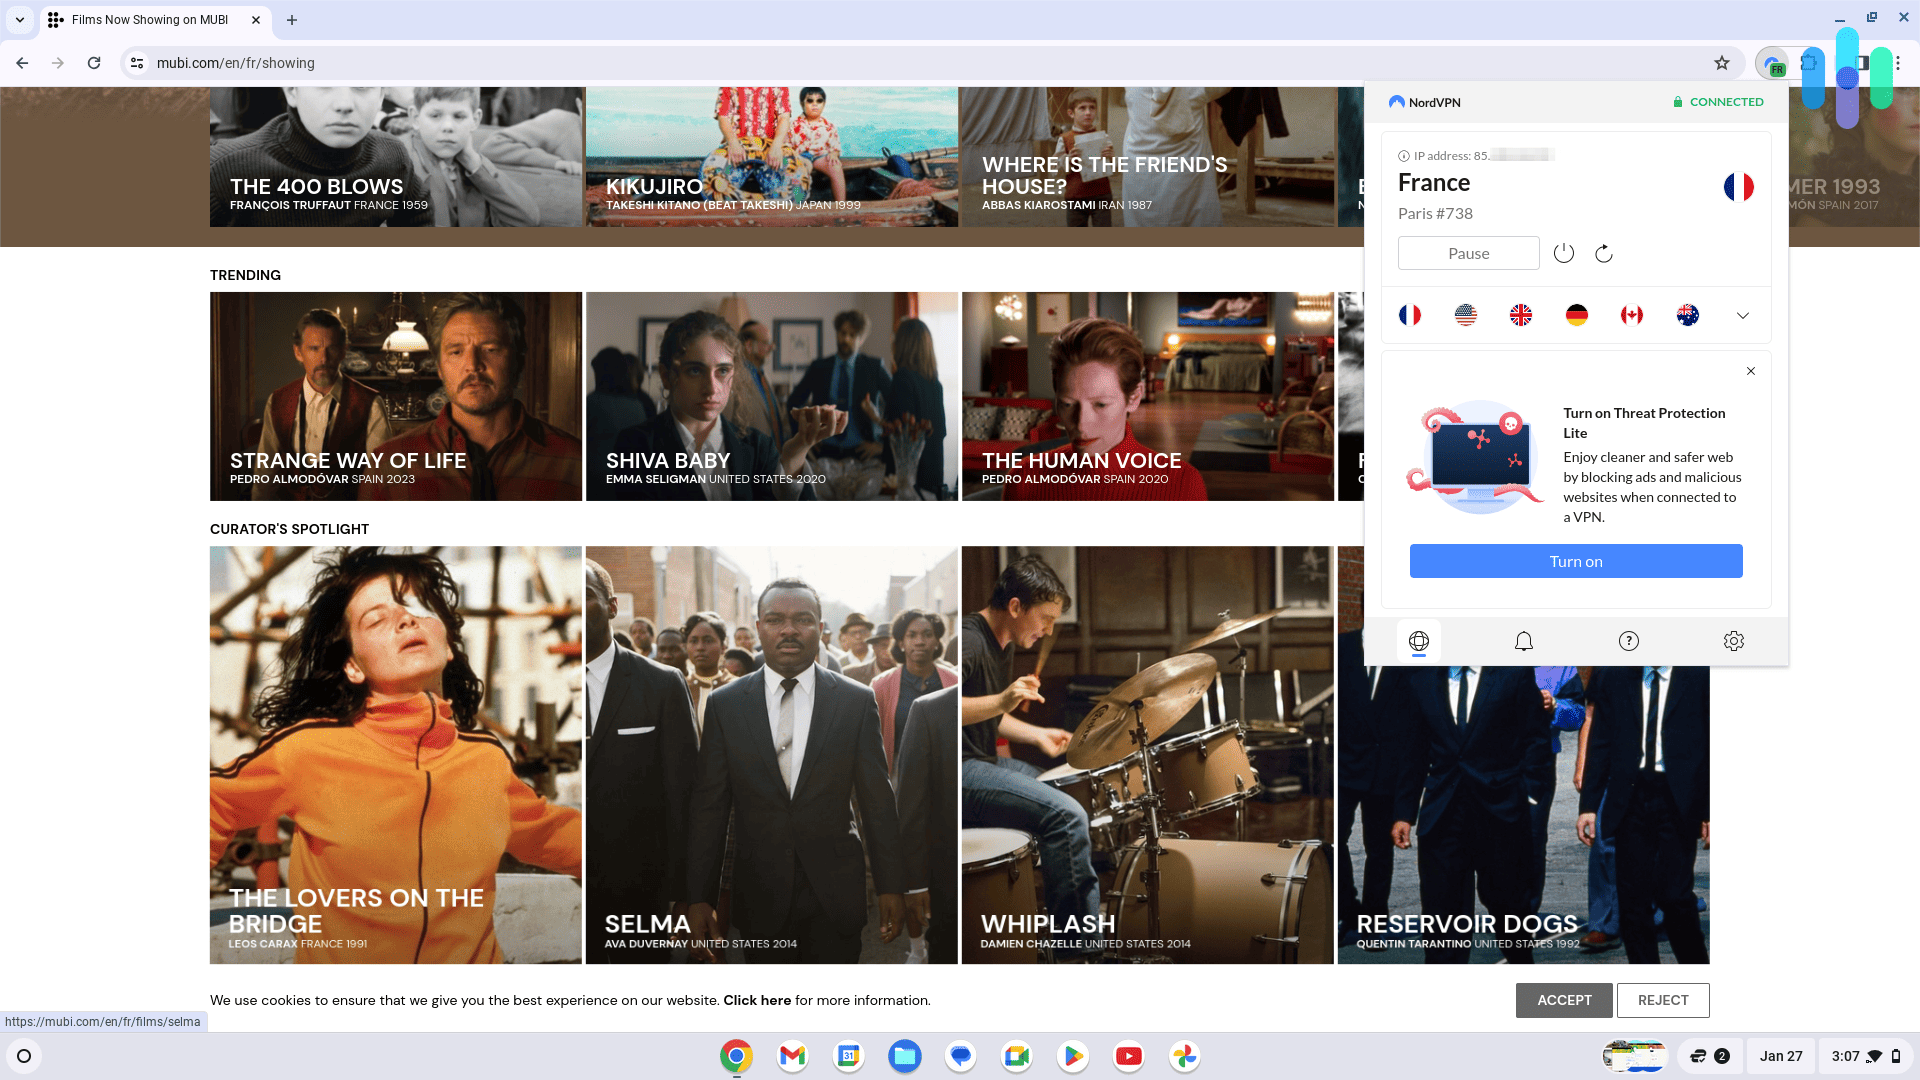 On Mubi and testing NordVPN connected to France on a Chromebook